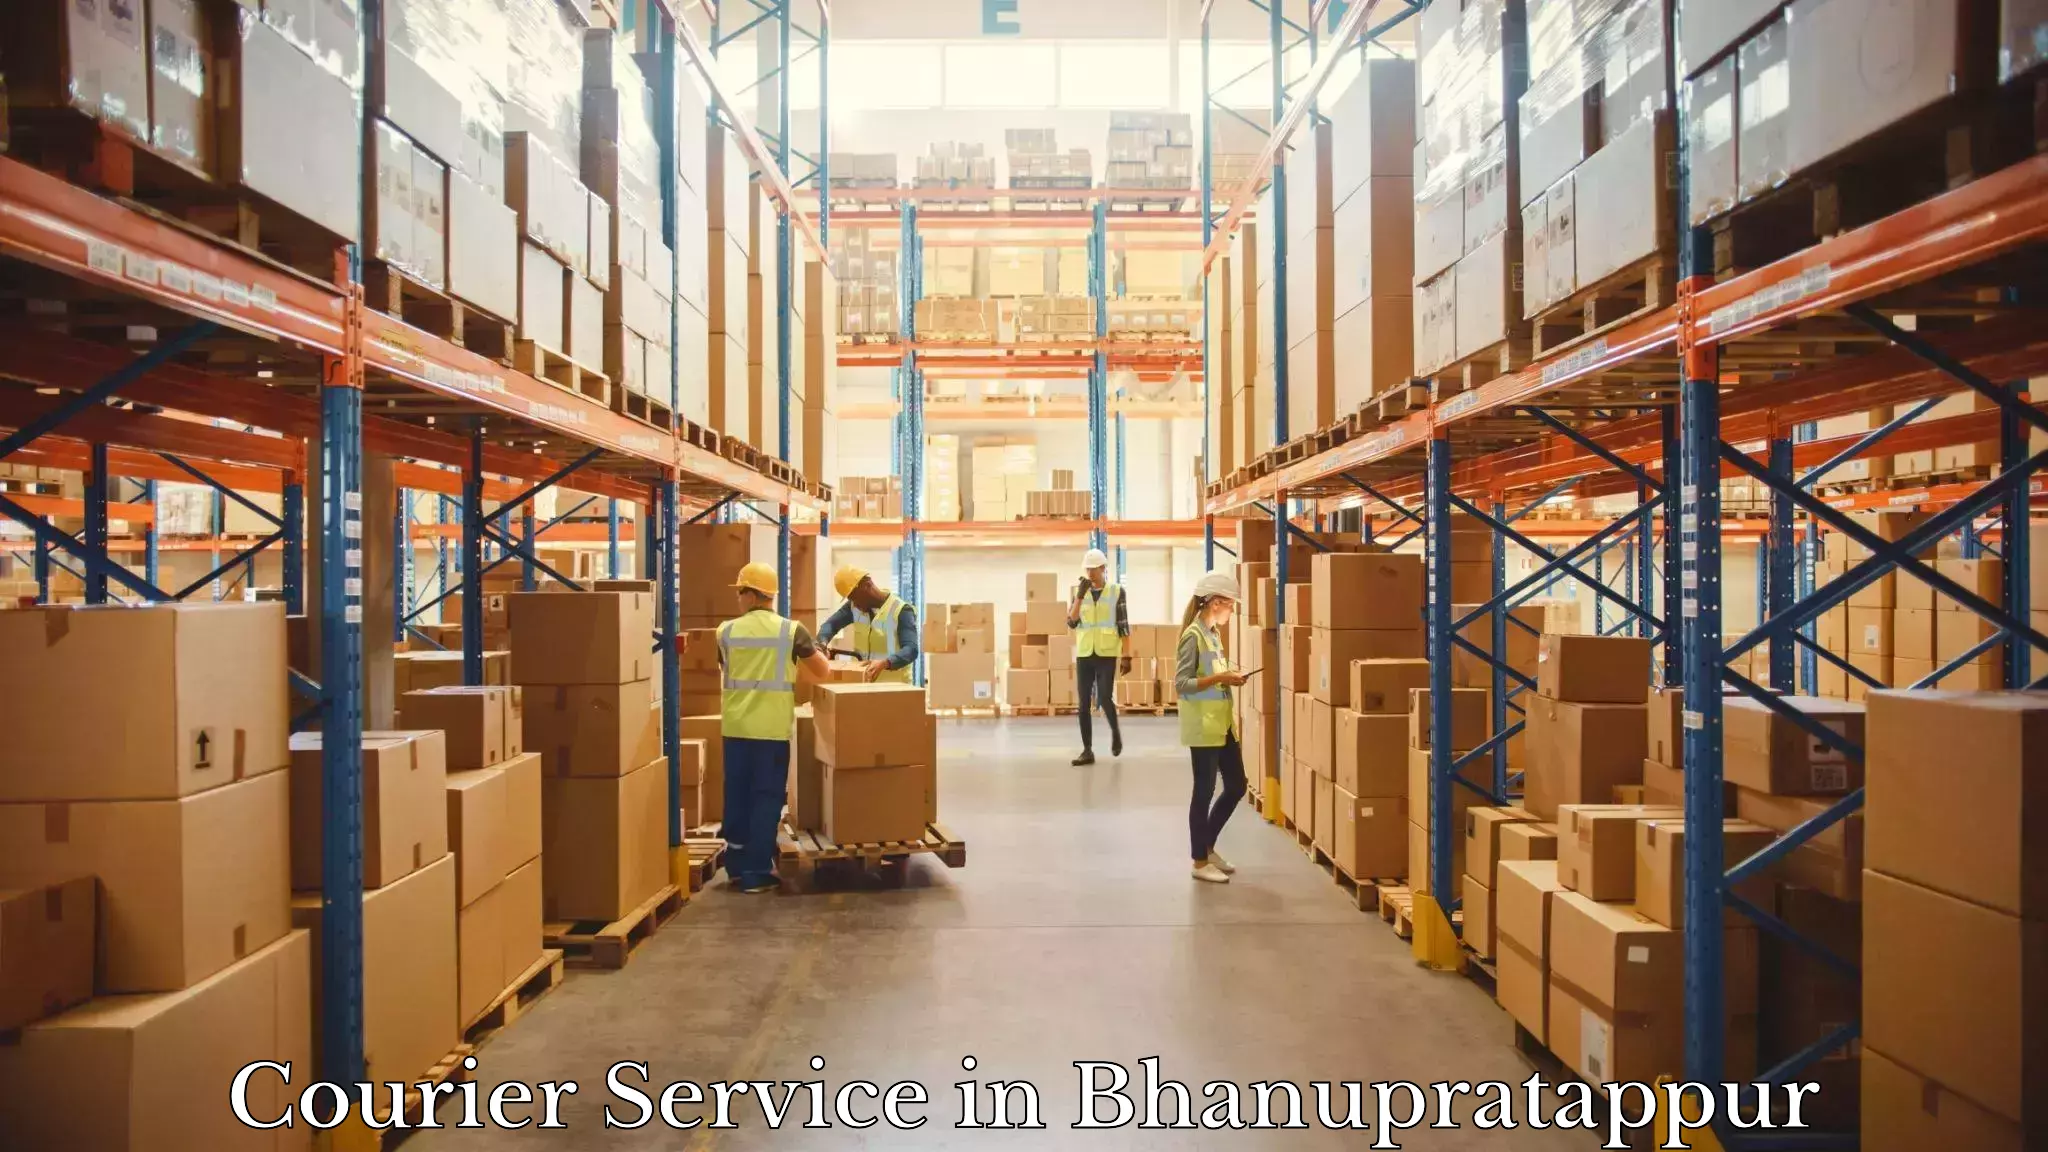 Automated shipping in Bhanupratappur